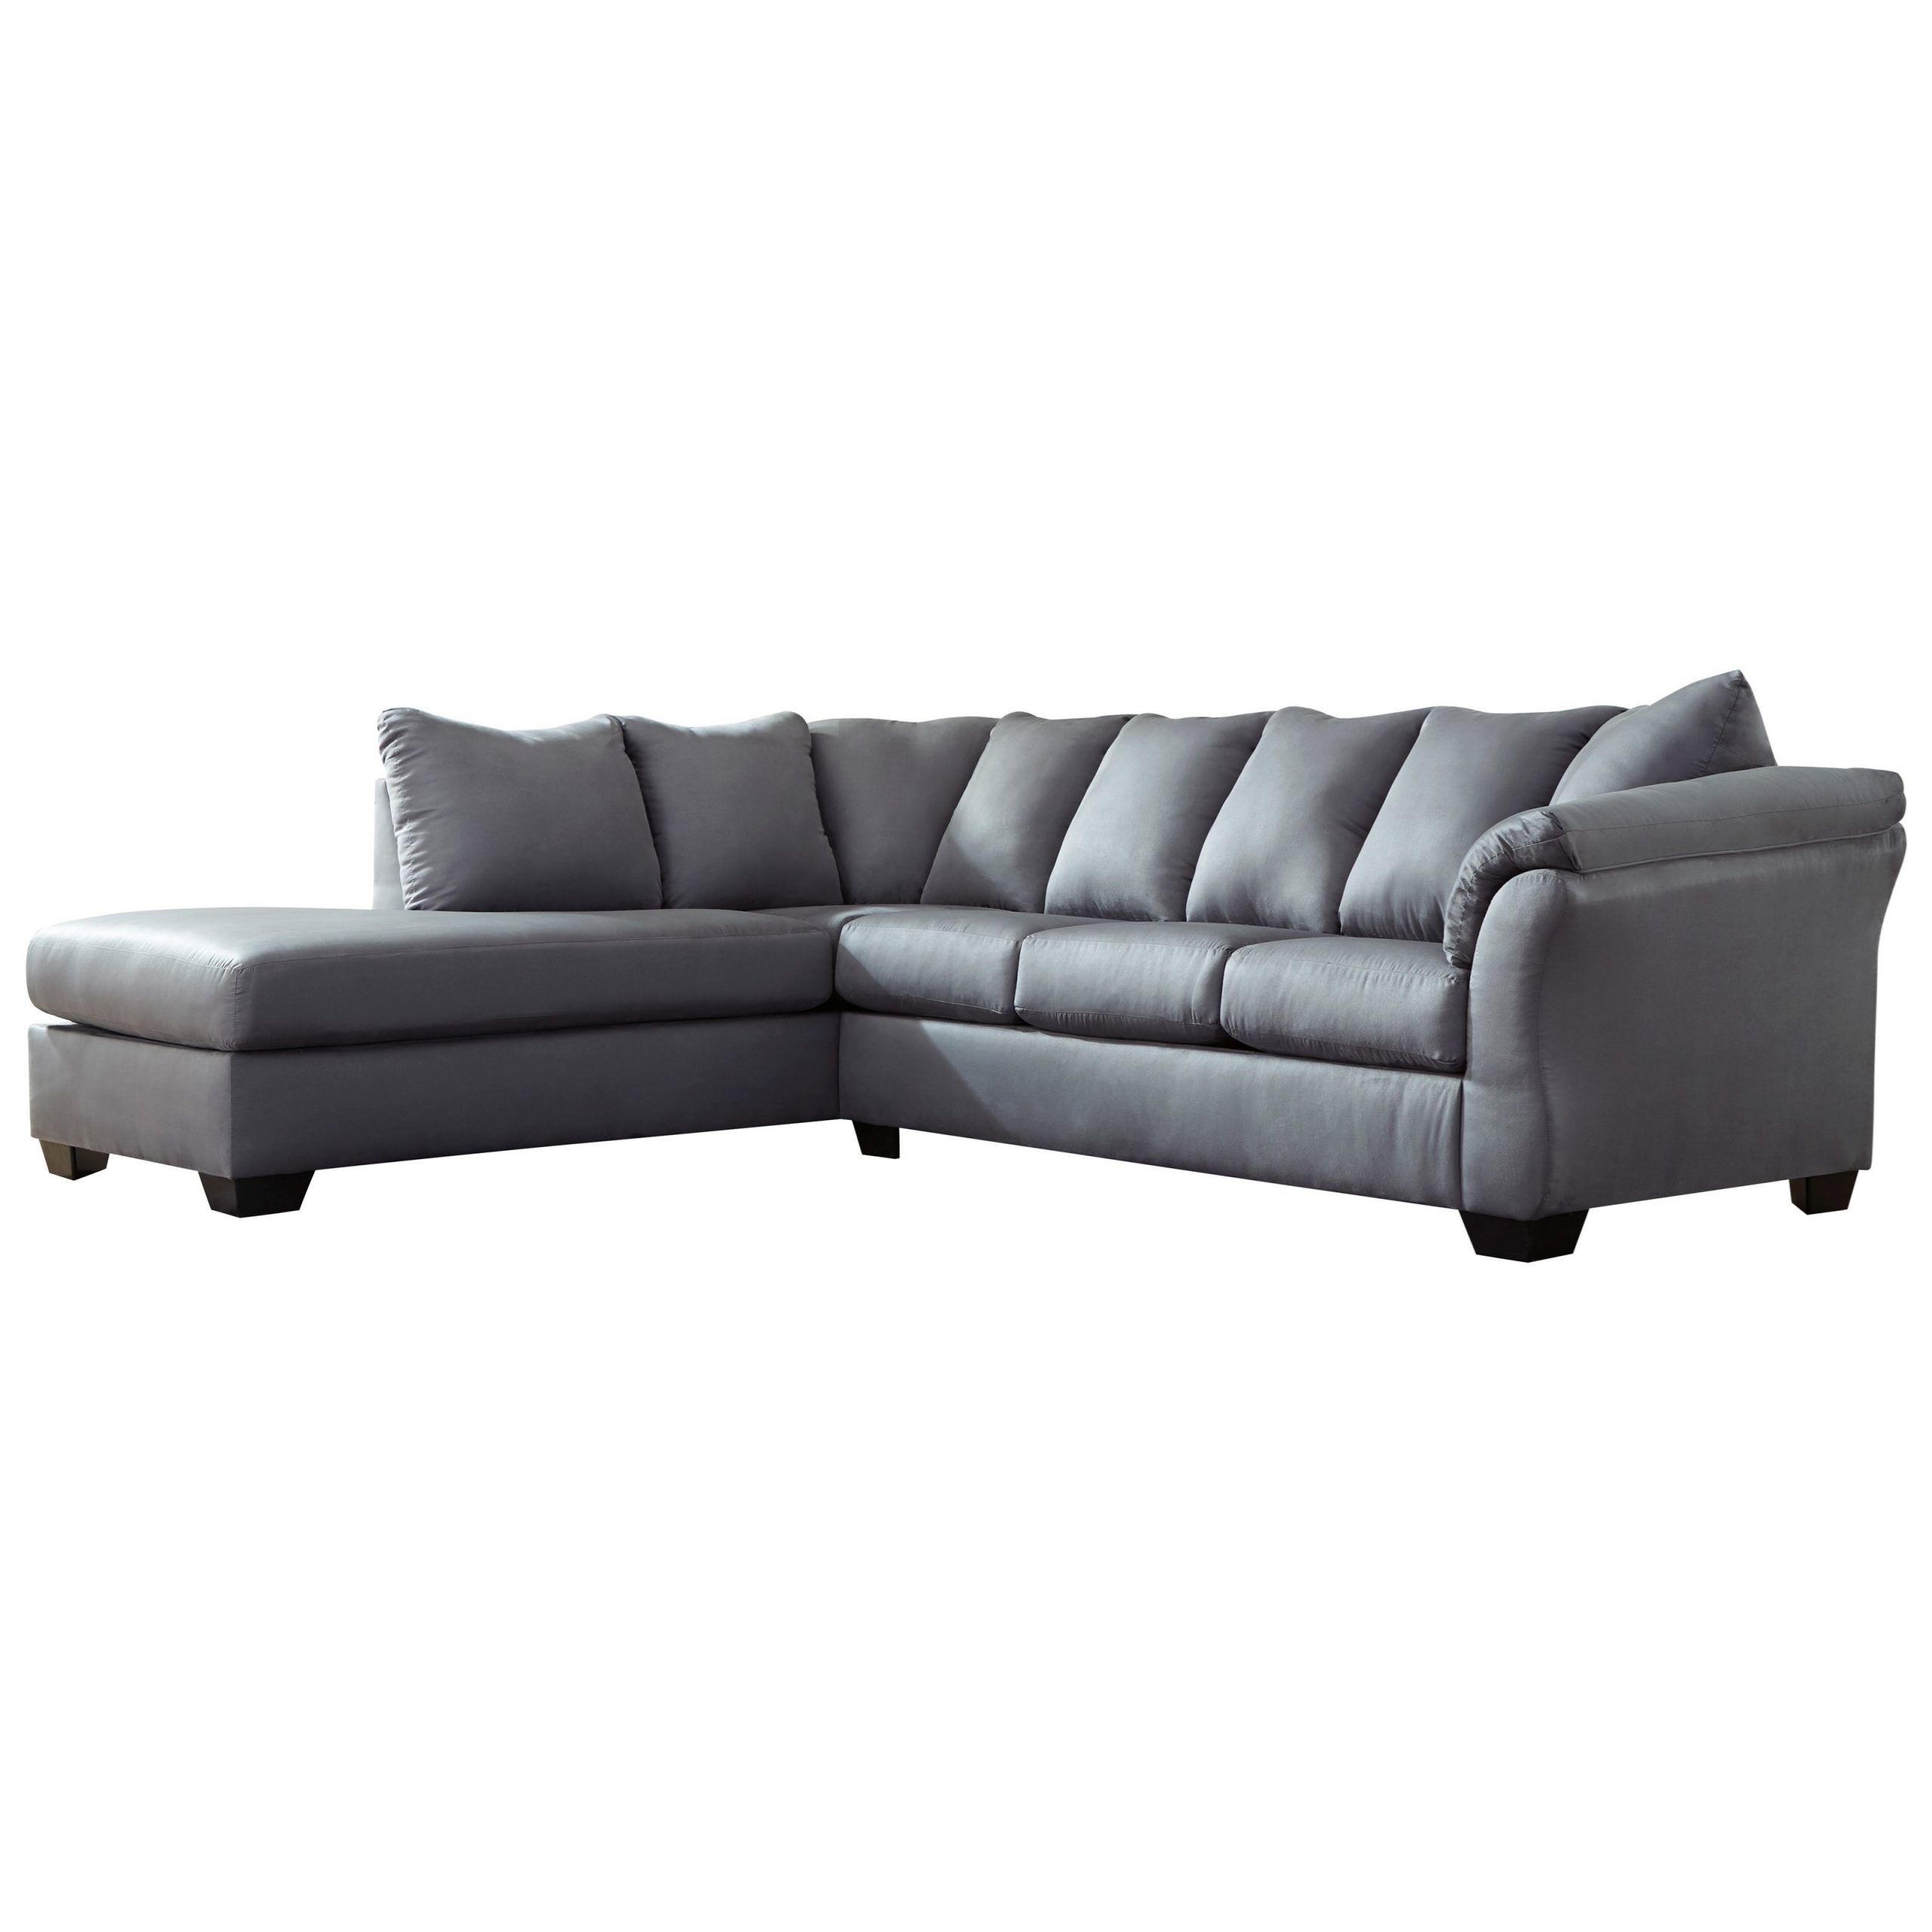 Signature Designashley Darcy – Steel Contemporary 2 Inside 2pc Burland Contemporary Chaise Sectional Sofas (View 4 of 15)